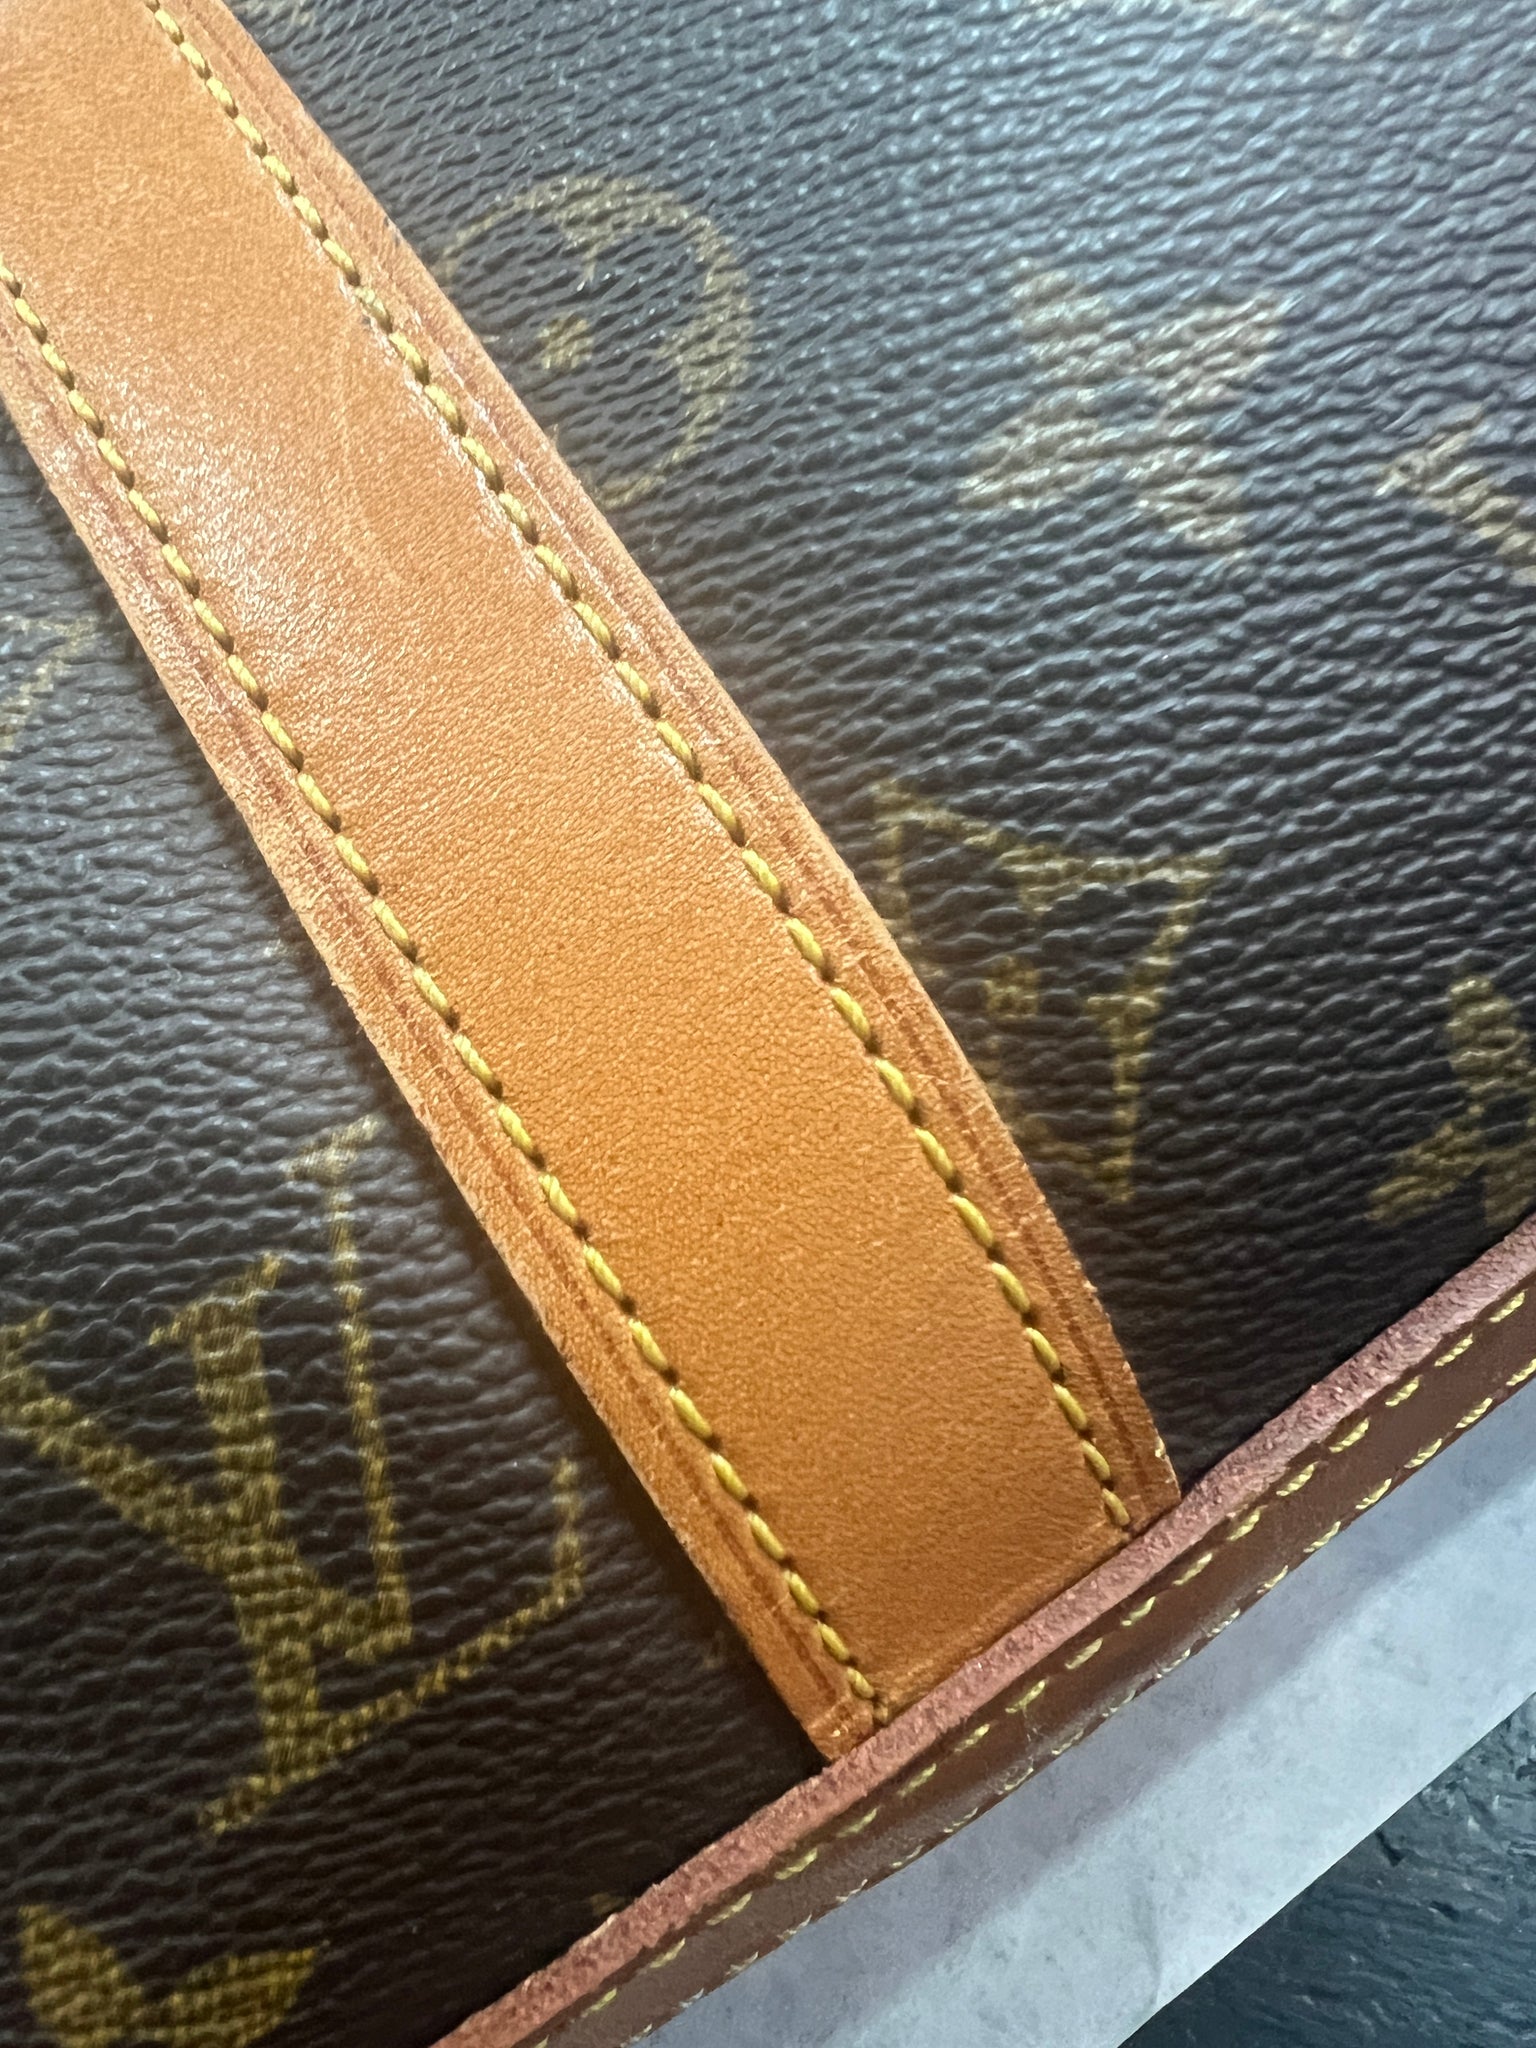 Remove water marks from Vachetta leather?